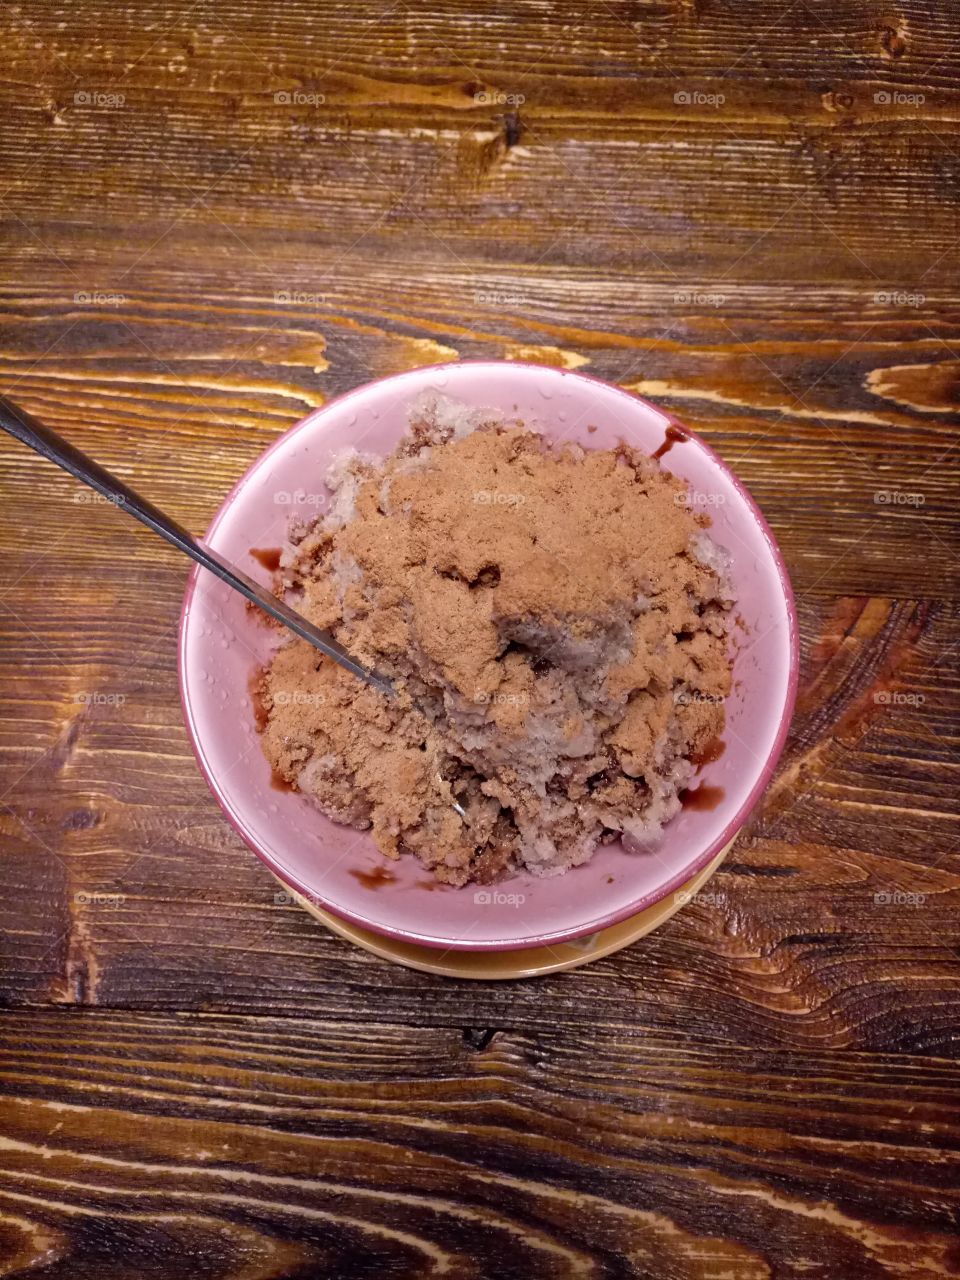 a bowl of chocolate ice during the day